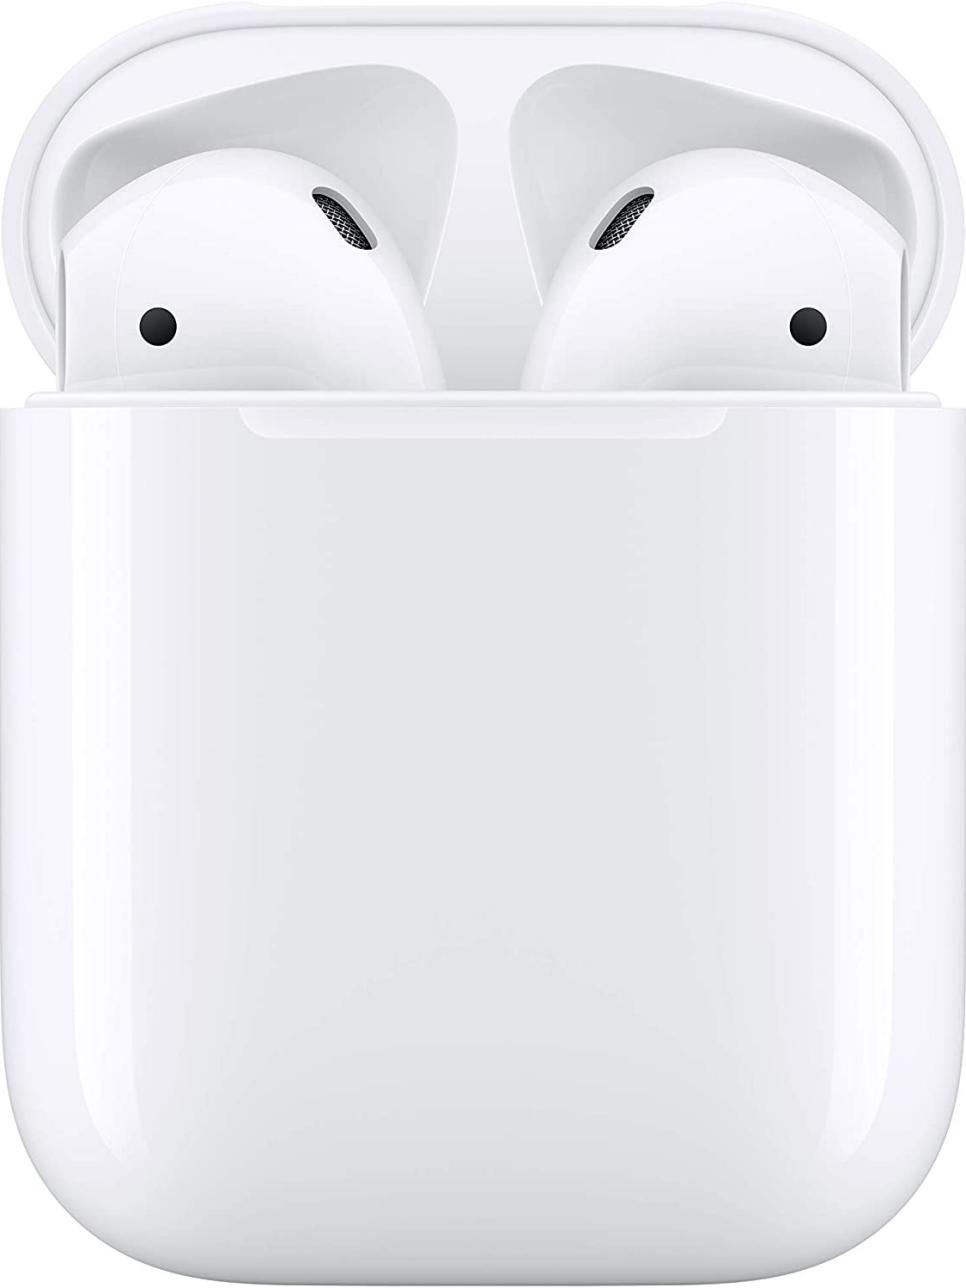 rx-amazonapple-airpods-with-charging-case-wired-.jpeg